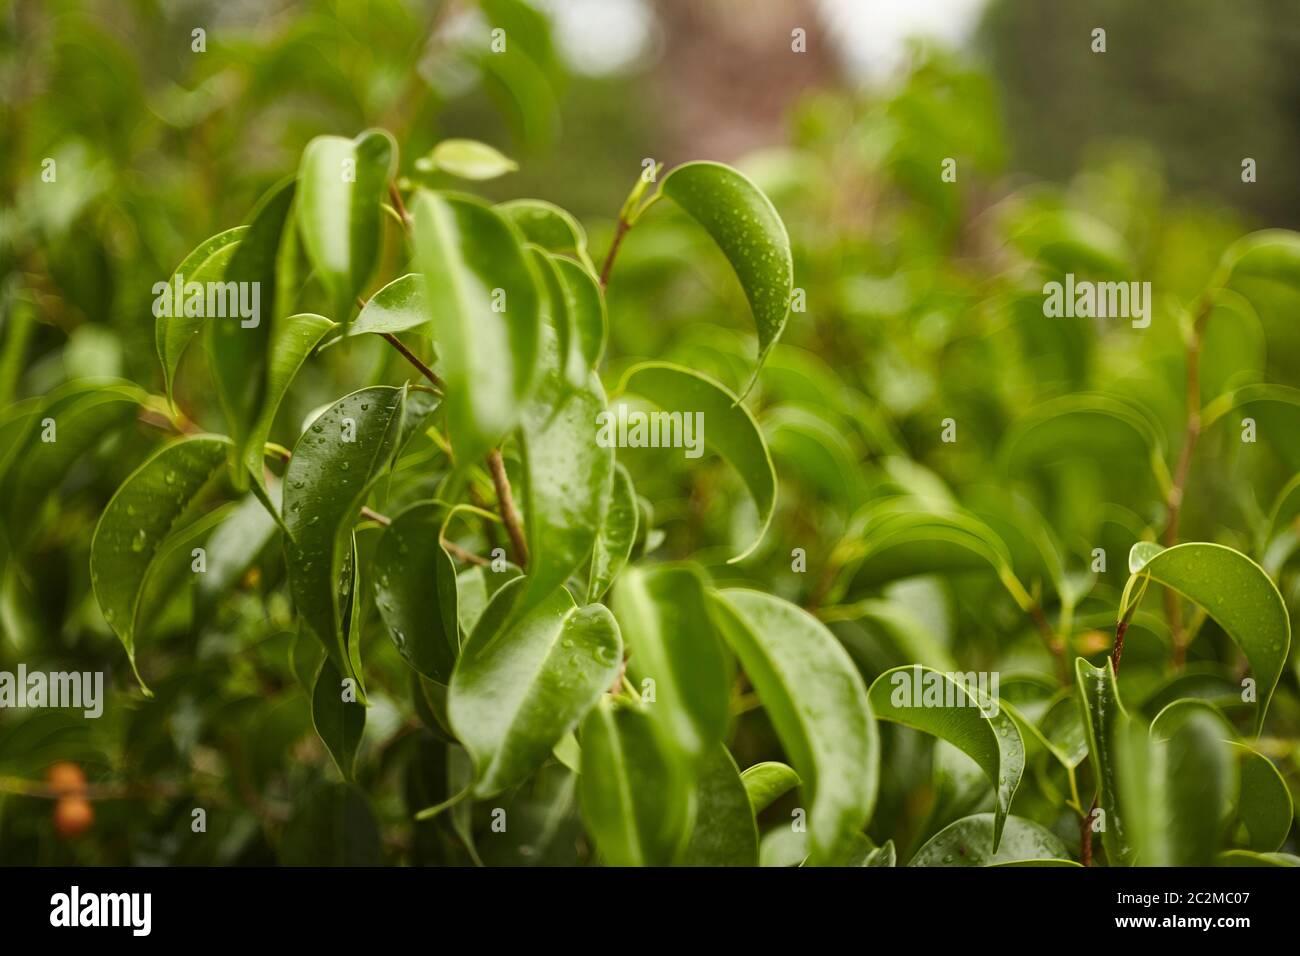 Some green leaves covered with droplets of water after the rain with the background made up of other forms of blurred leaves. Stock Photo